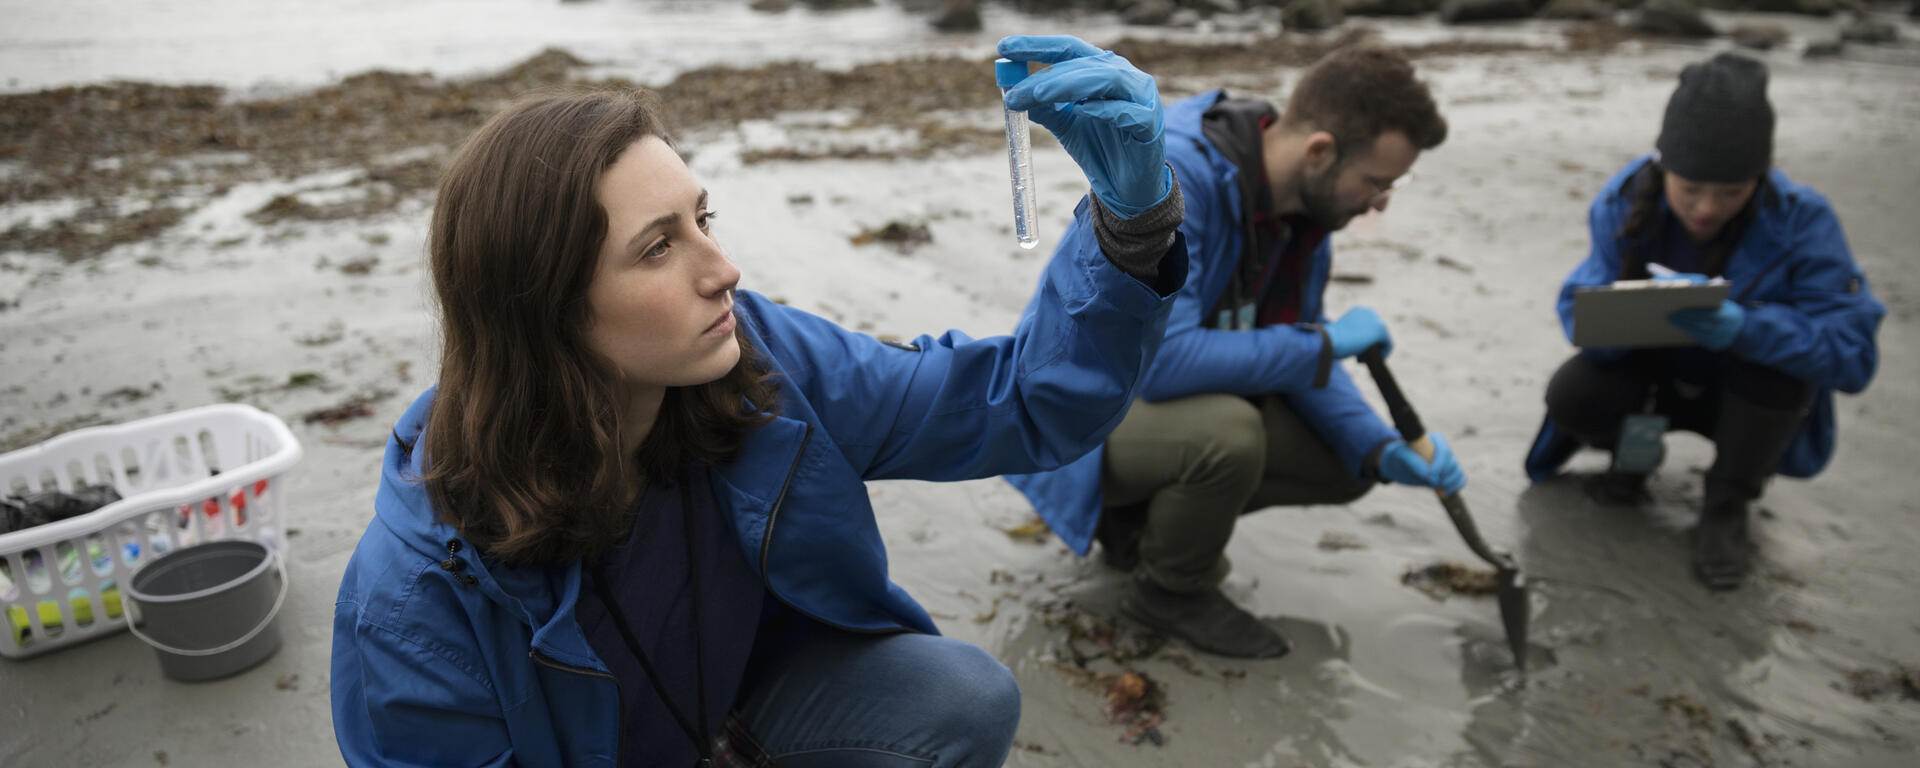 A young person with long brown hair examines a test tube of something on a beach with other researchers in the background.